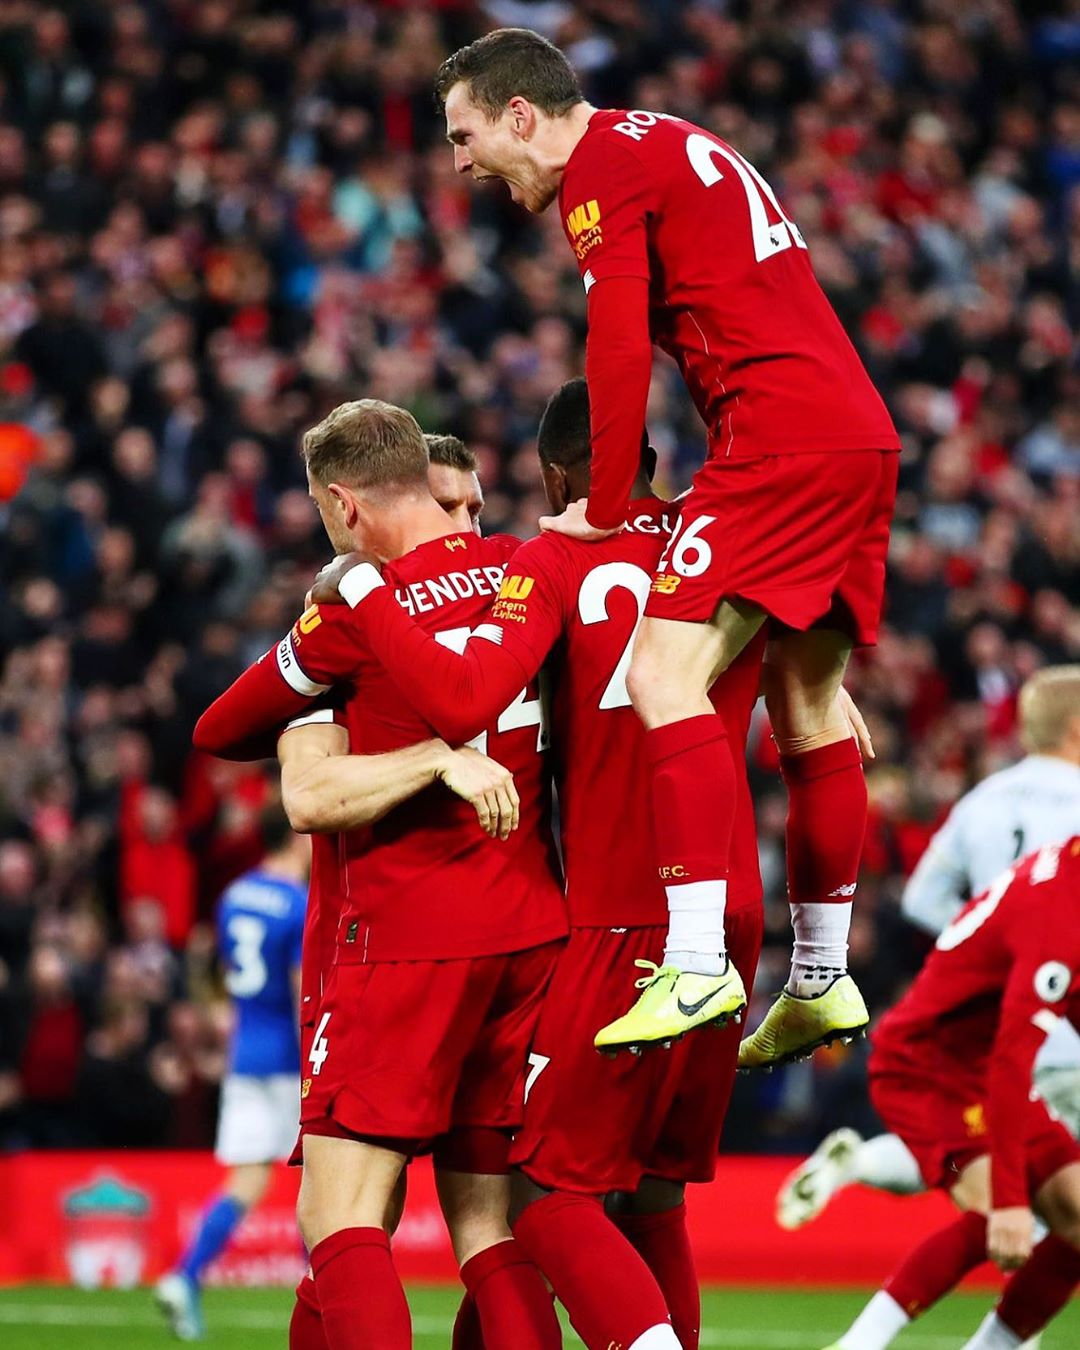 Liverpool 2 - 1 Leicester City